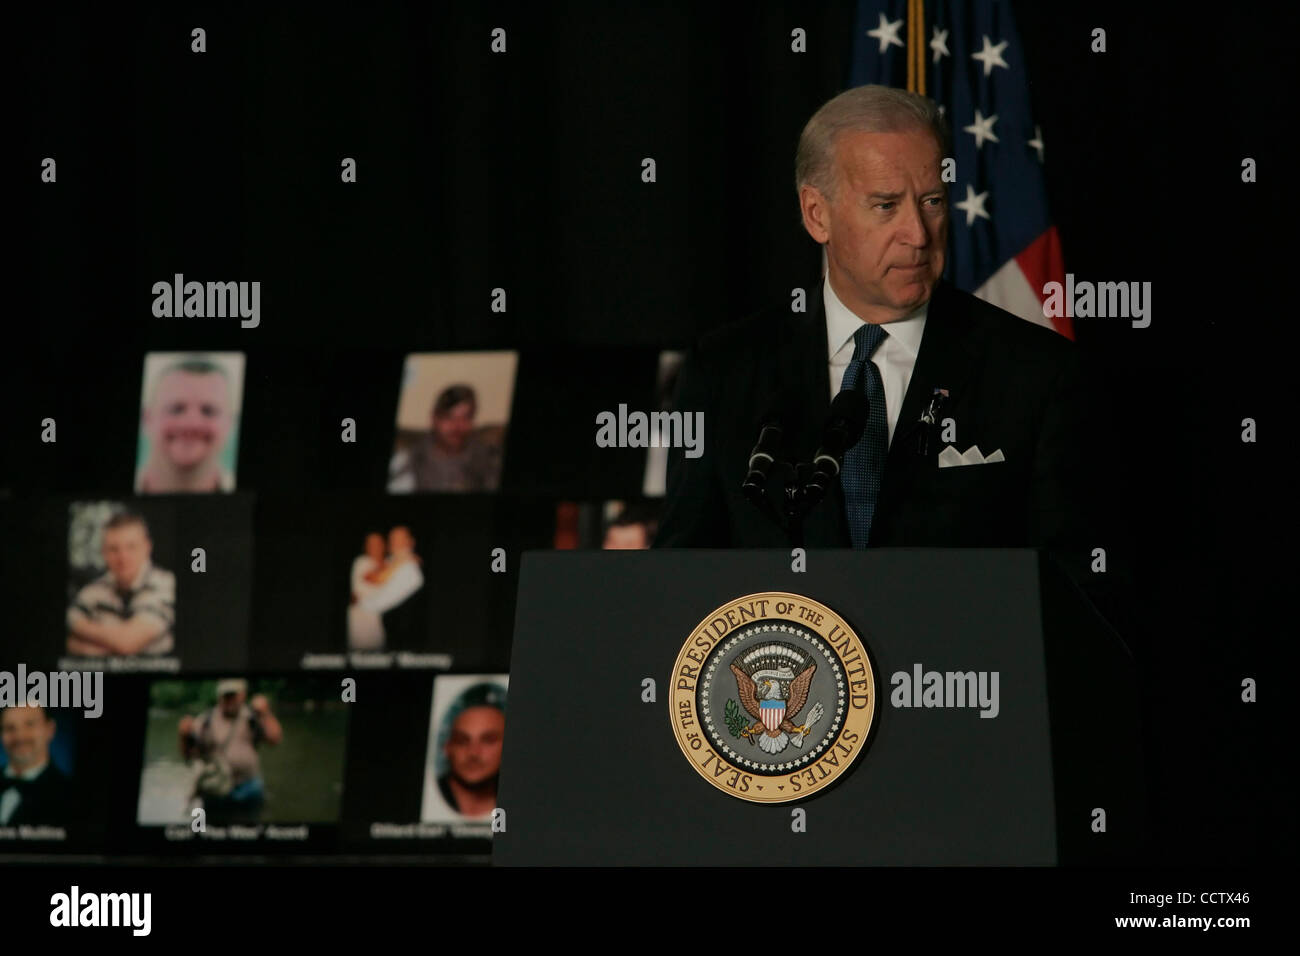 Vice President JOE BIDEN spoke during a memorial service honoring the fallen Upper Big Branch miners. Biden and the president were among those who spoke at the service honoring 29 coal miners who died in an April 5 explosion at Massey Energy's Upper Big Branch Mine near Montcoal, West Virginia. Stock Photo